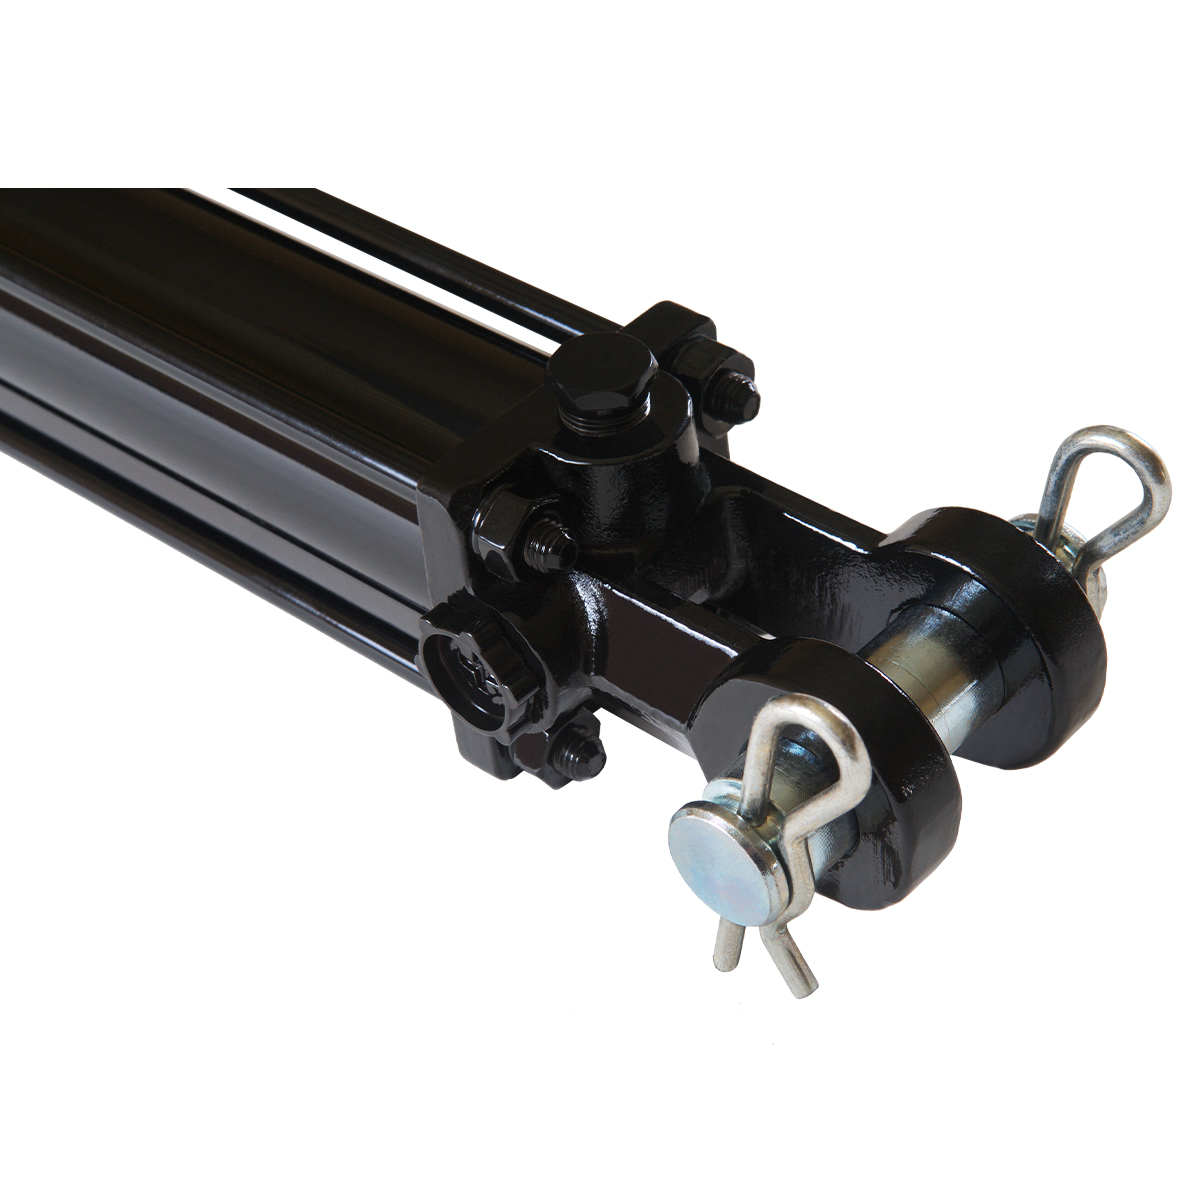 2.5 bore x 20 stroke hydraulic cylinder, tie rod double acting cylinder | Magister Hydraulics